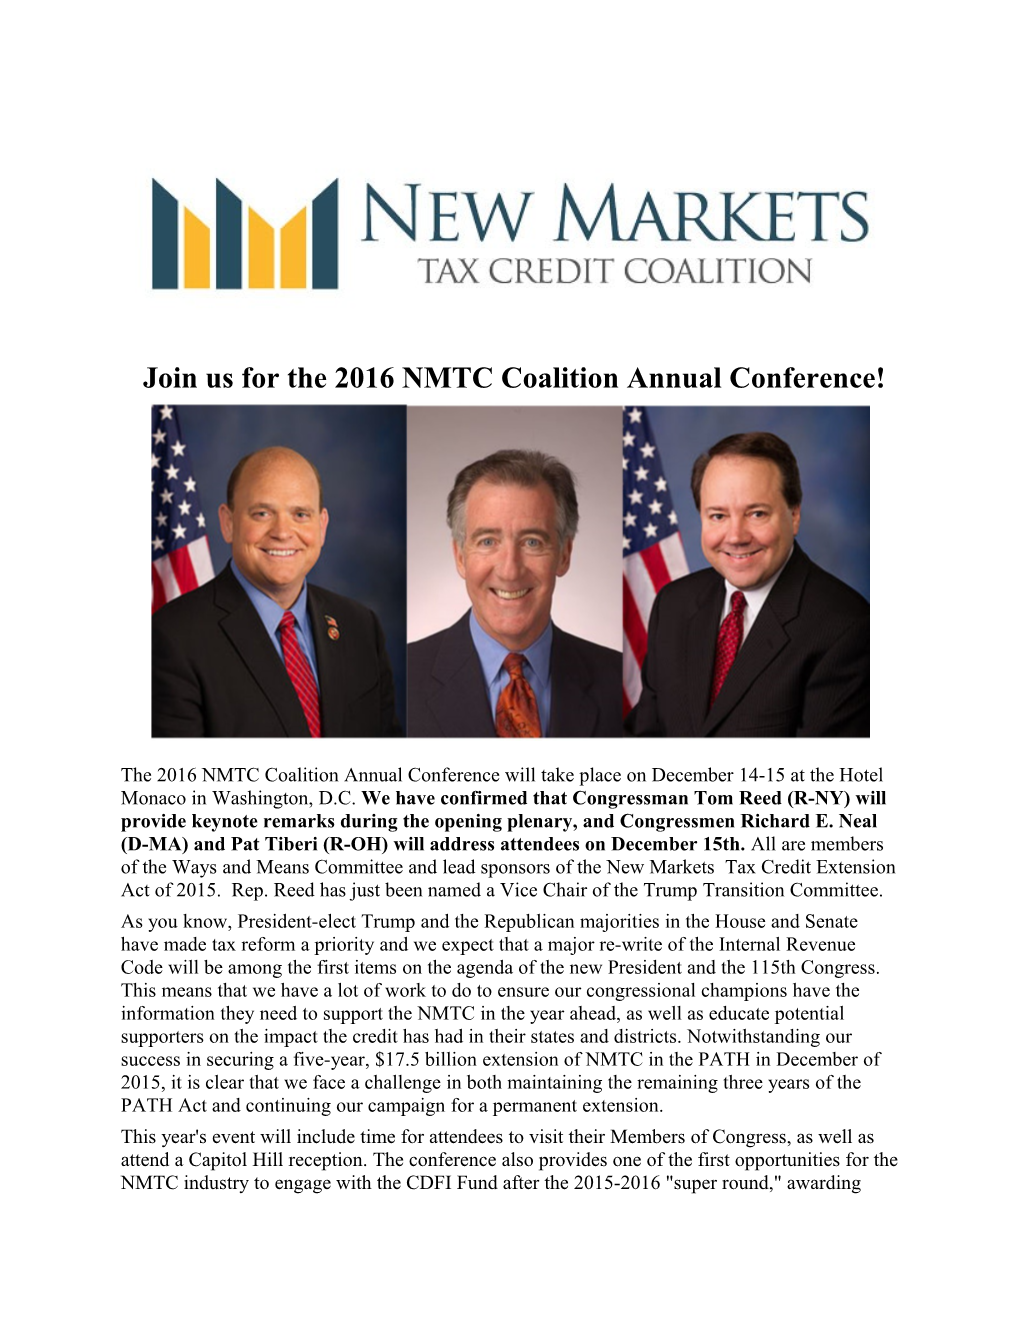 Join Us for the 2016 NMTC Coalition Annual Conference!